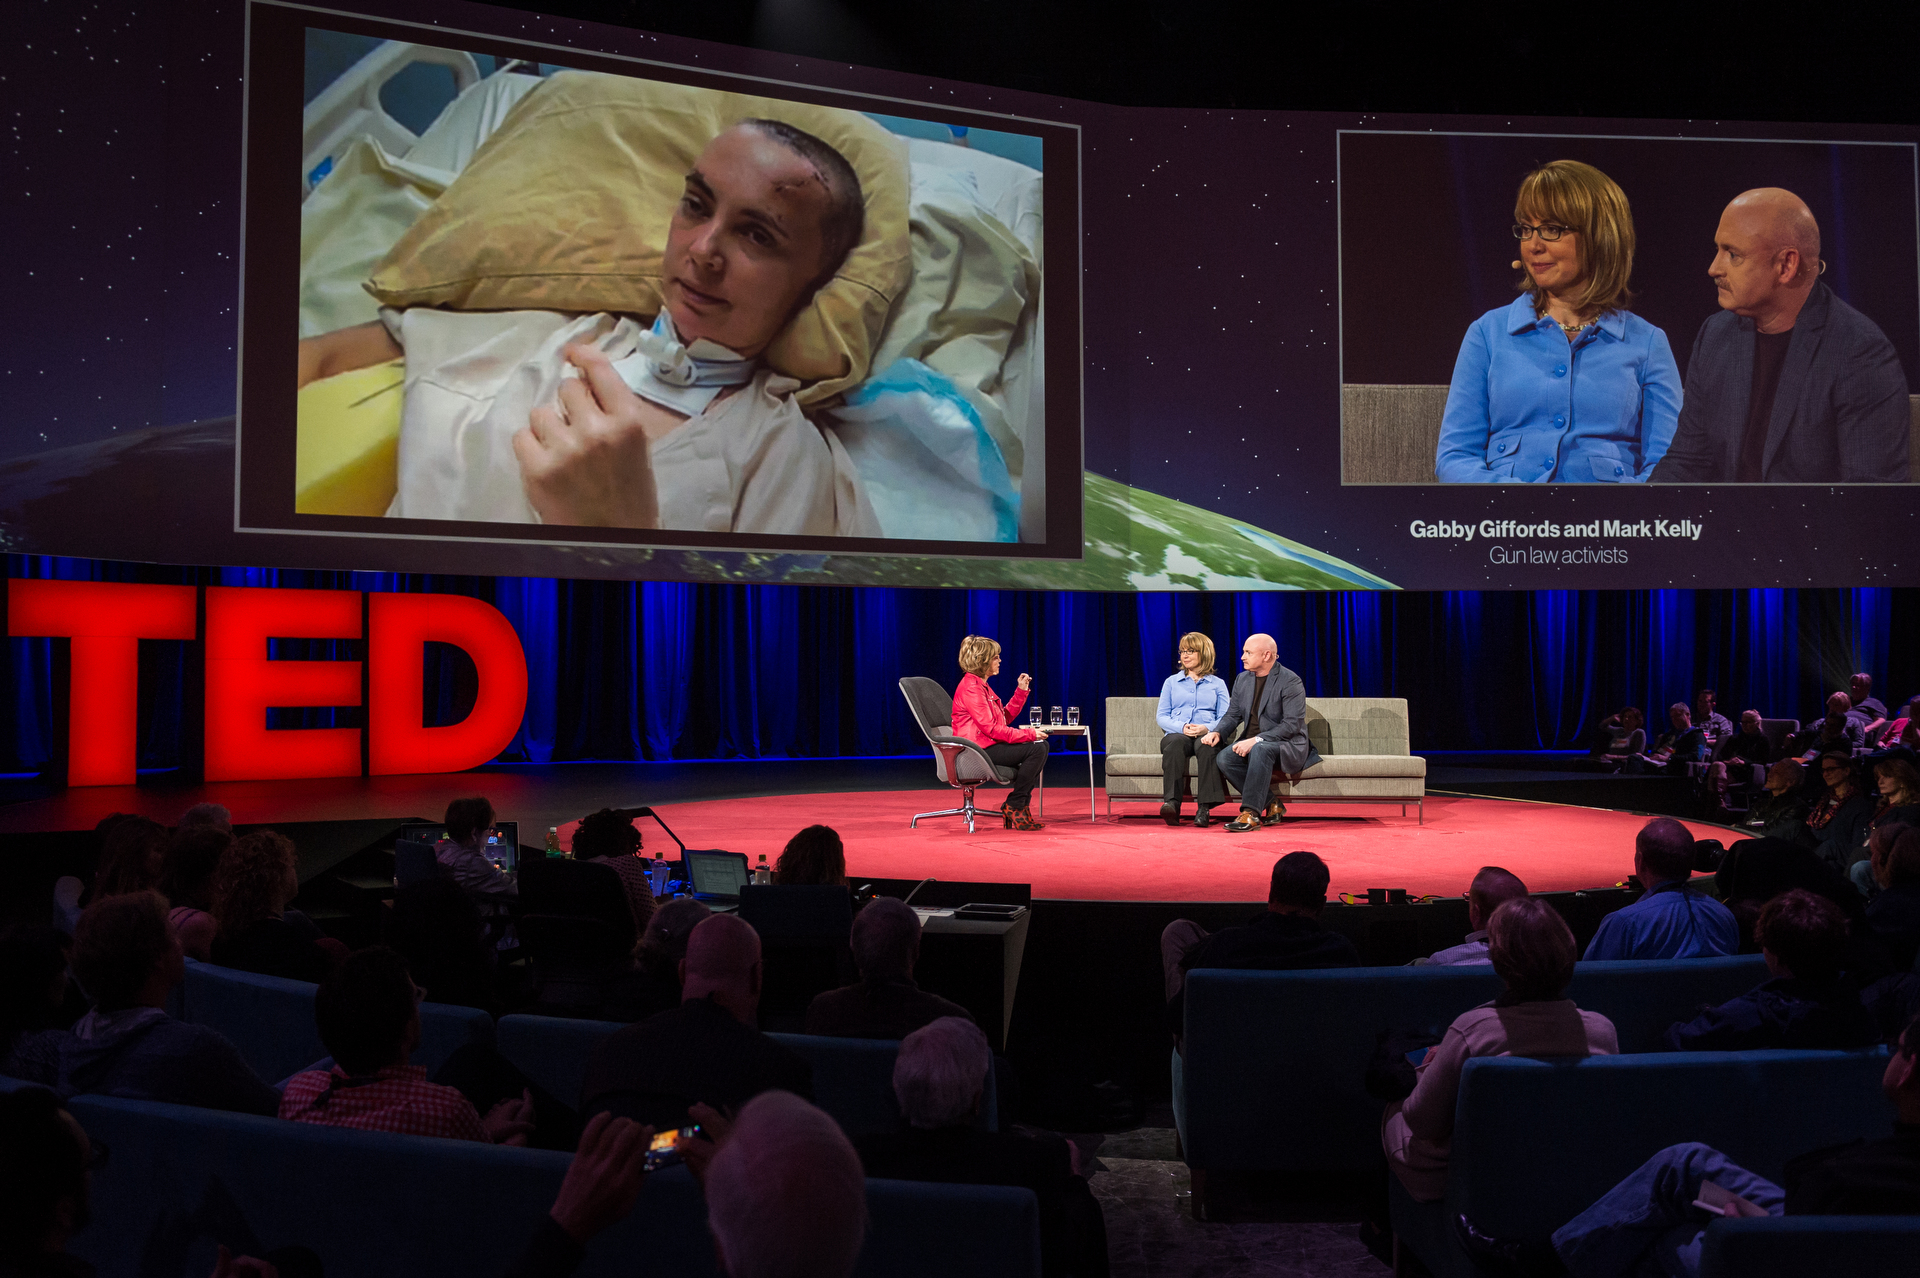 (L-R) Pat Mitchell interviews Gabby Giffords and Mark Kelly. Photo: James Duncan Davidson